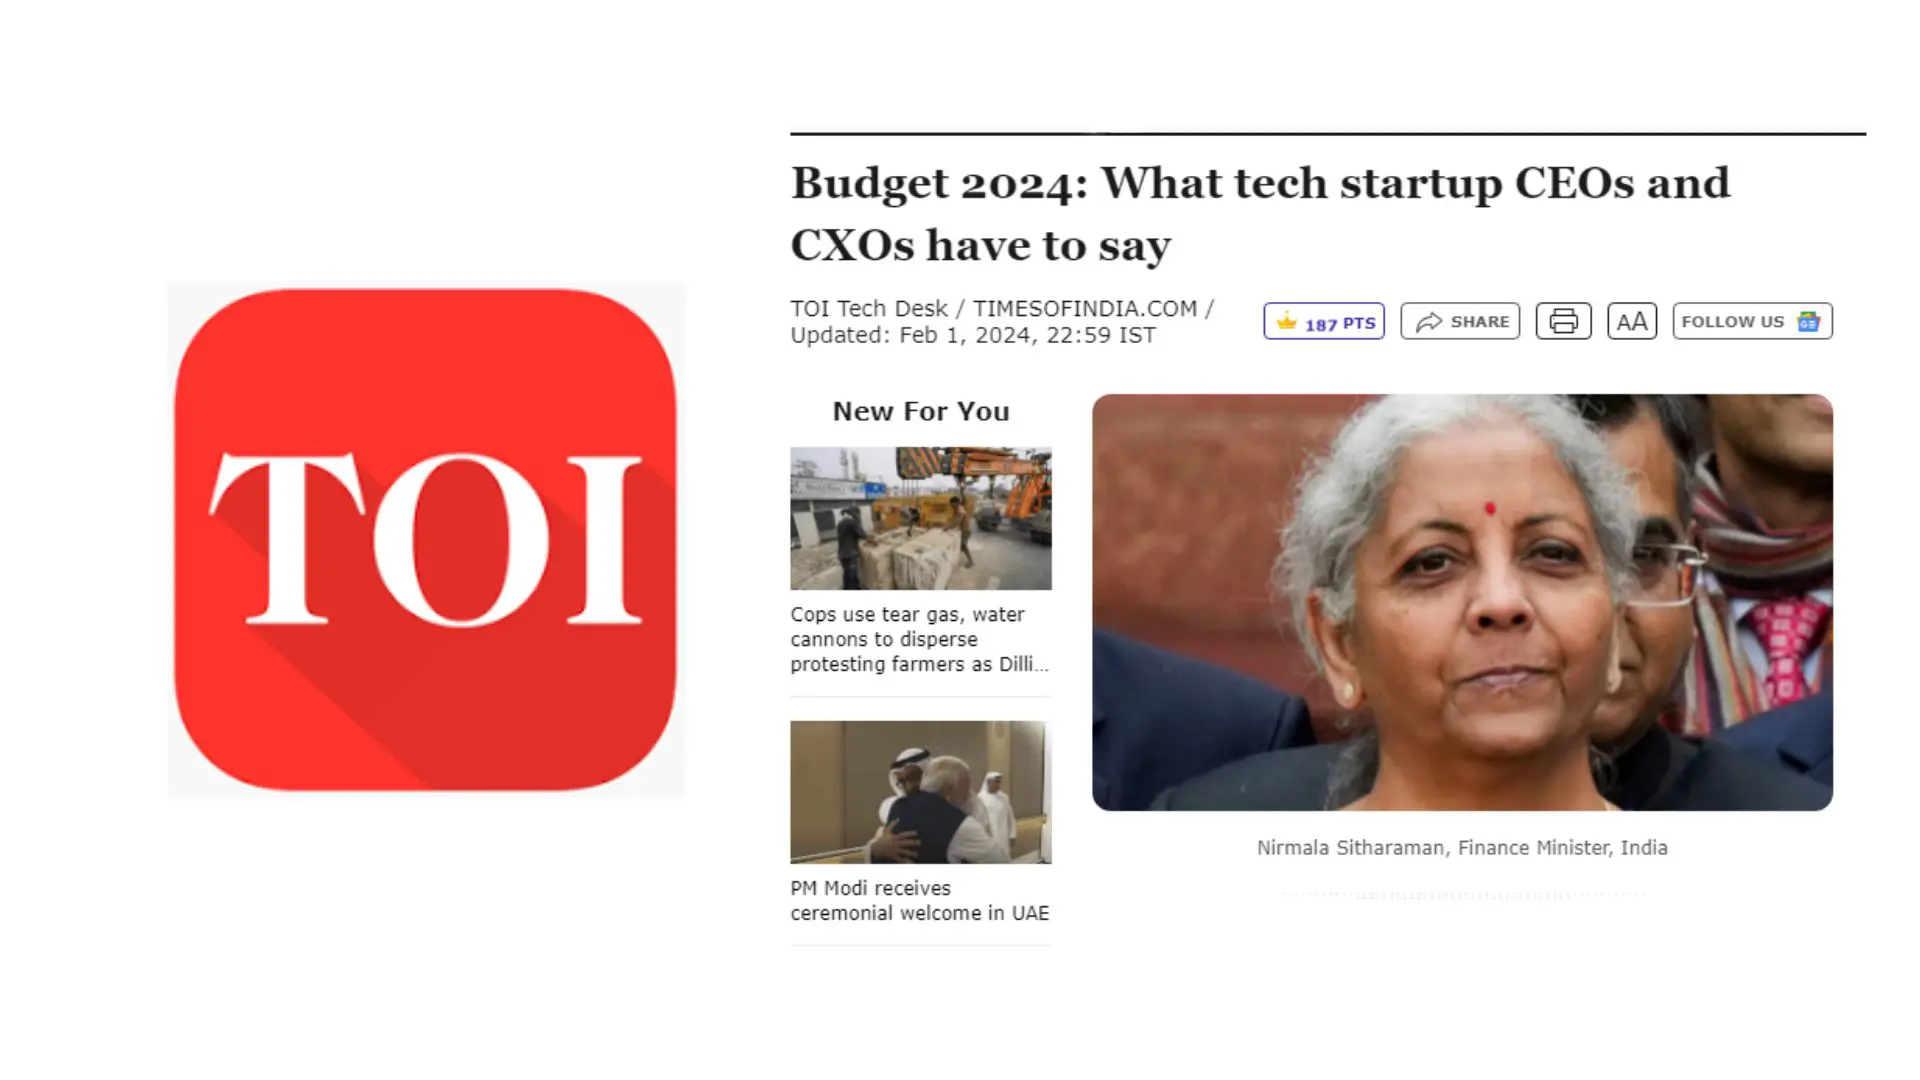 The Times of India (Budget 2024)